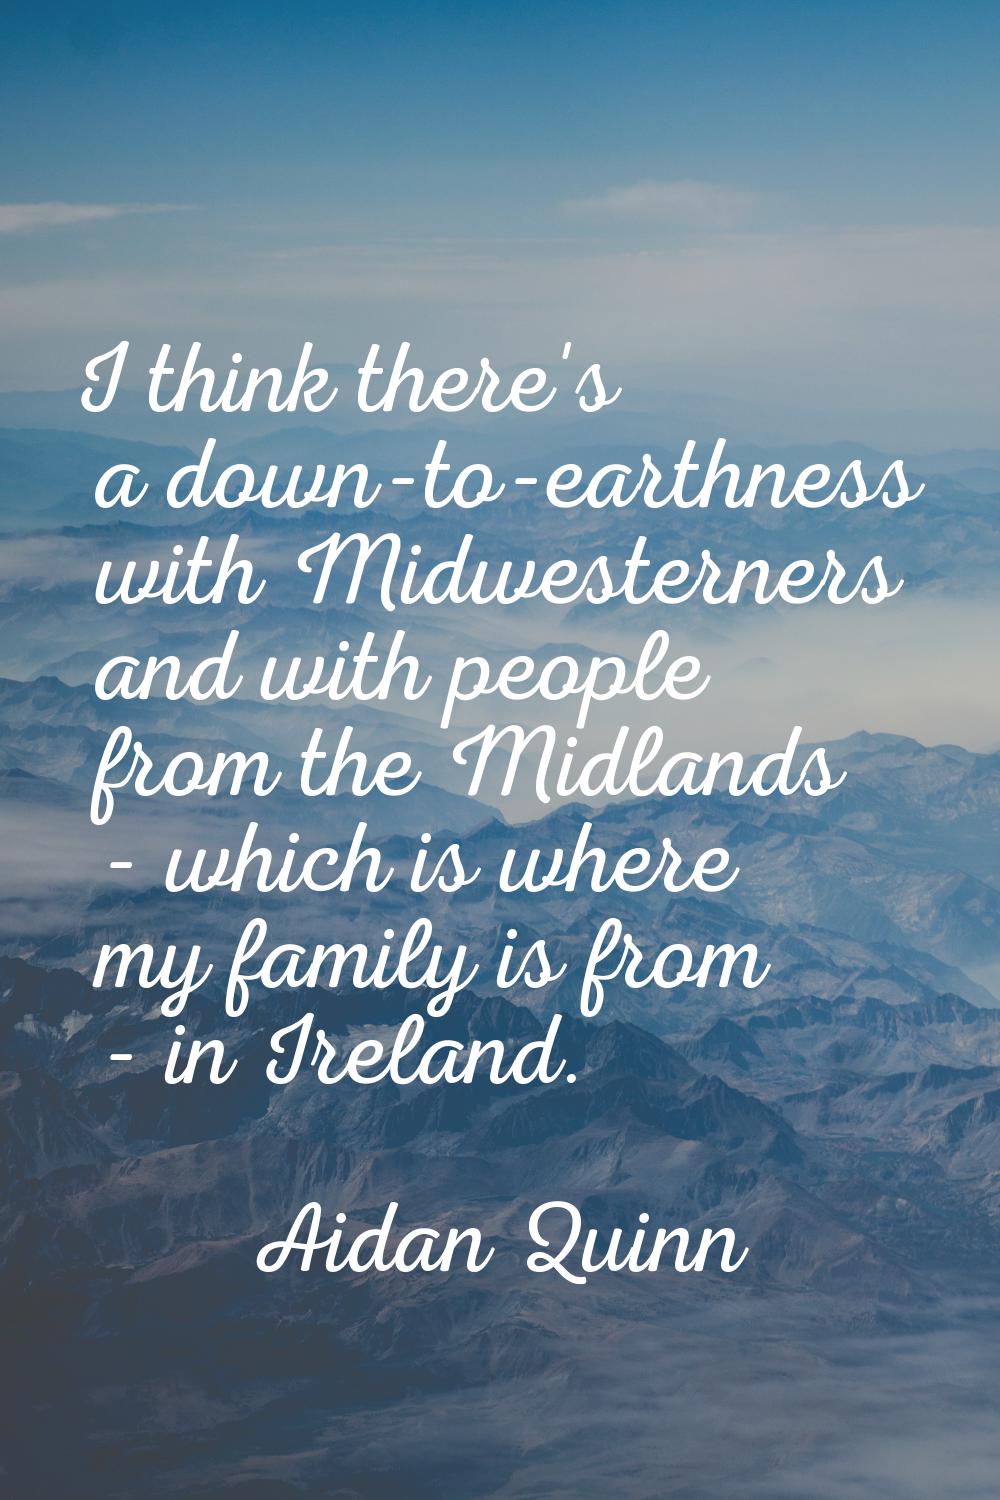 I think there's a down-to-earthness with Midwesterners and with people from the Midlands - which is